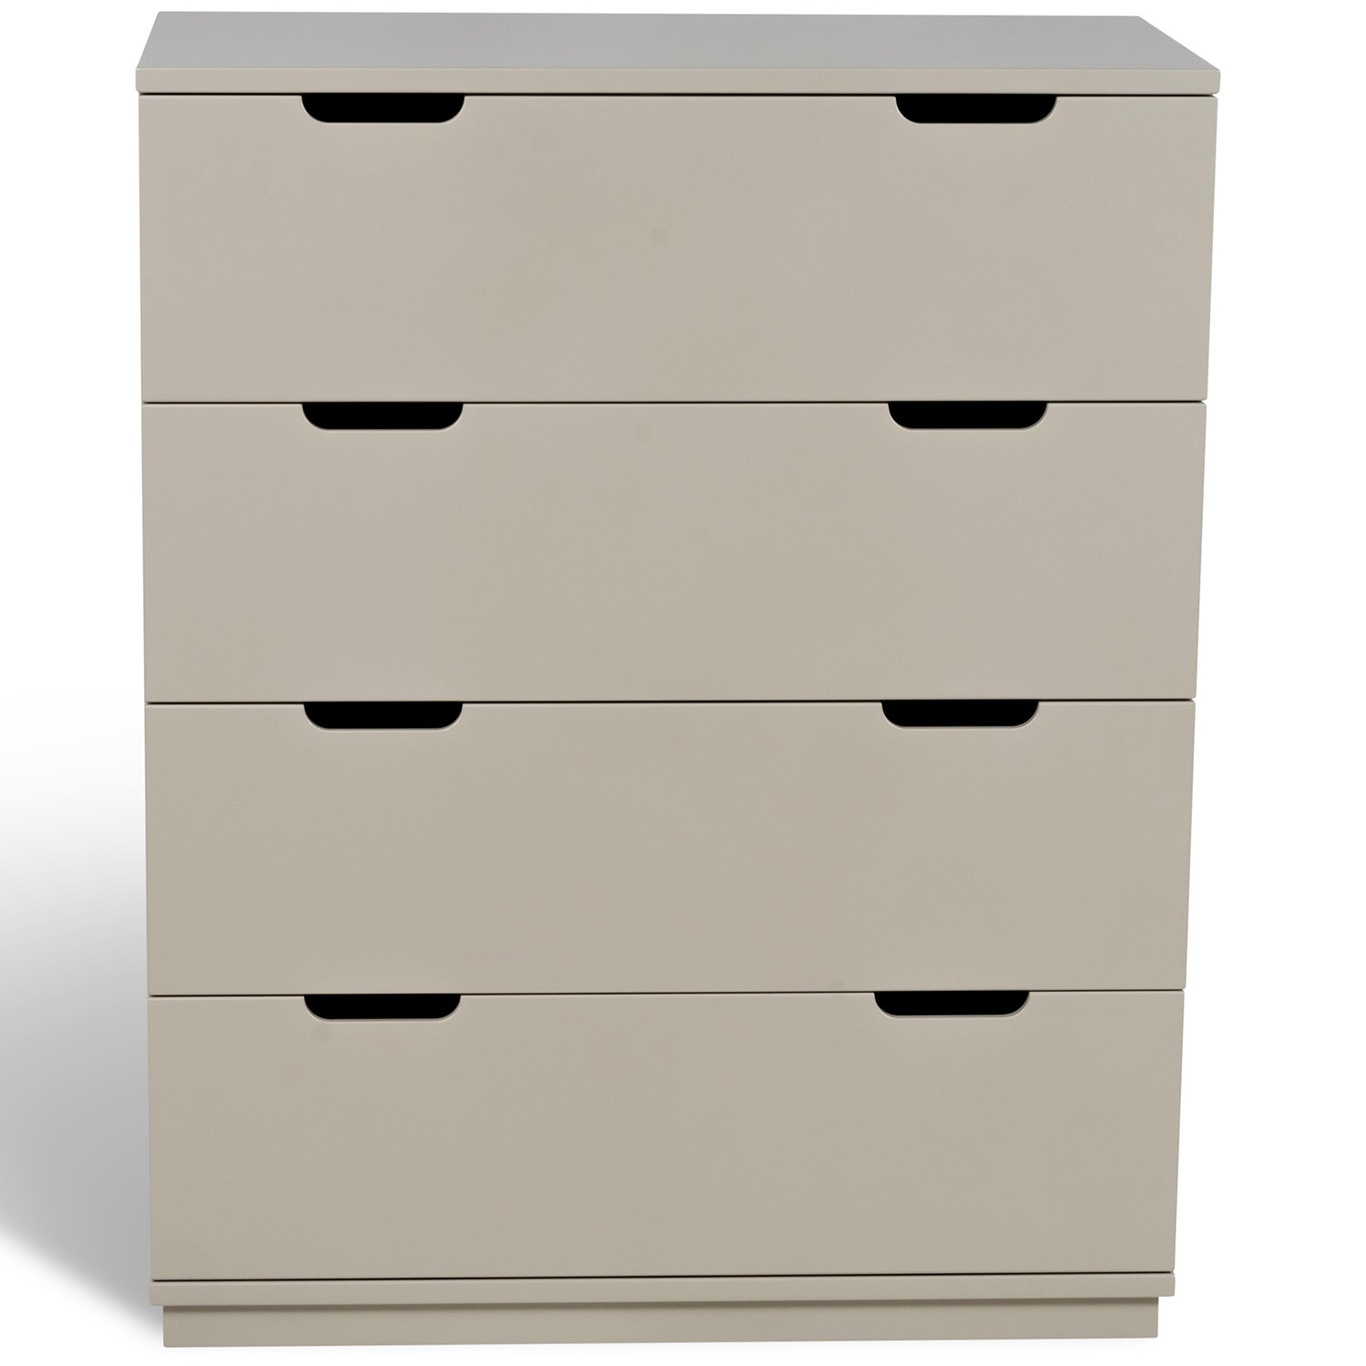 Aoko Chest Of Drawers With 4 Drawers, Beige